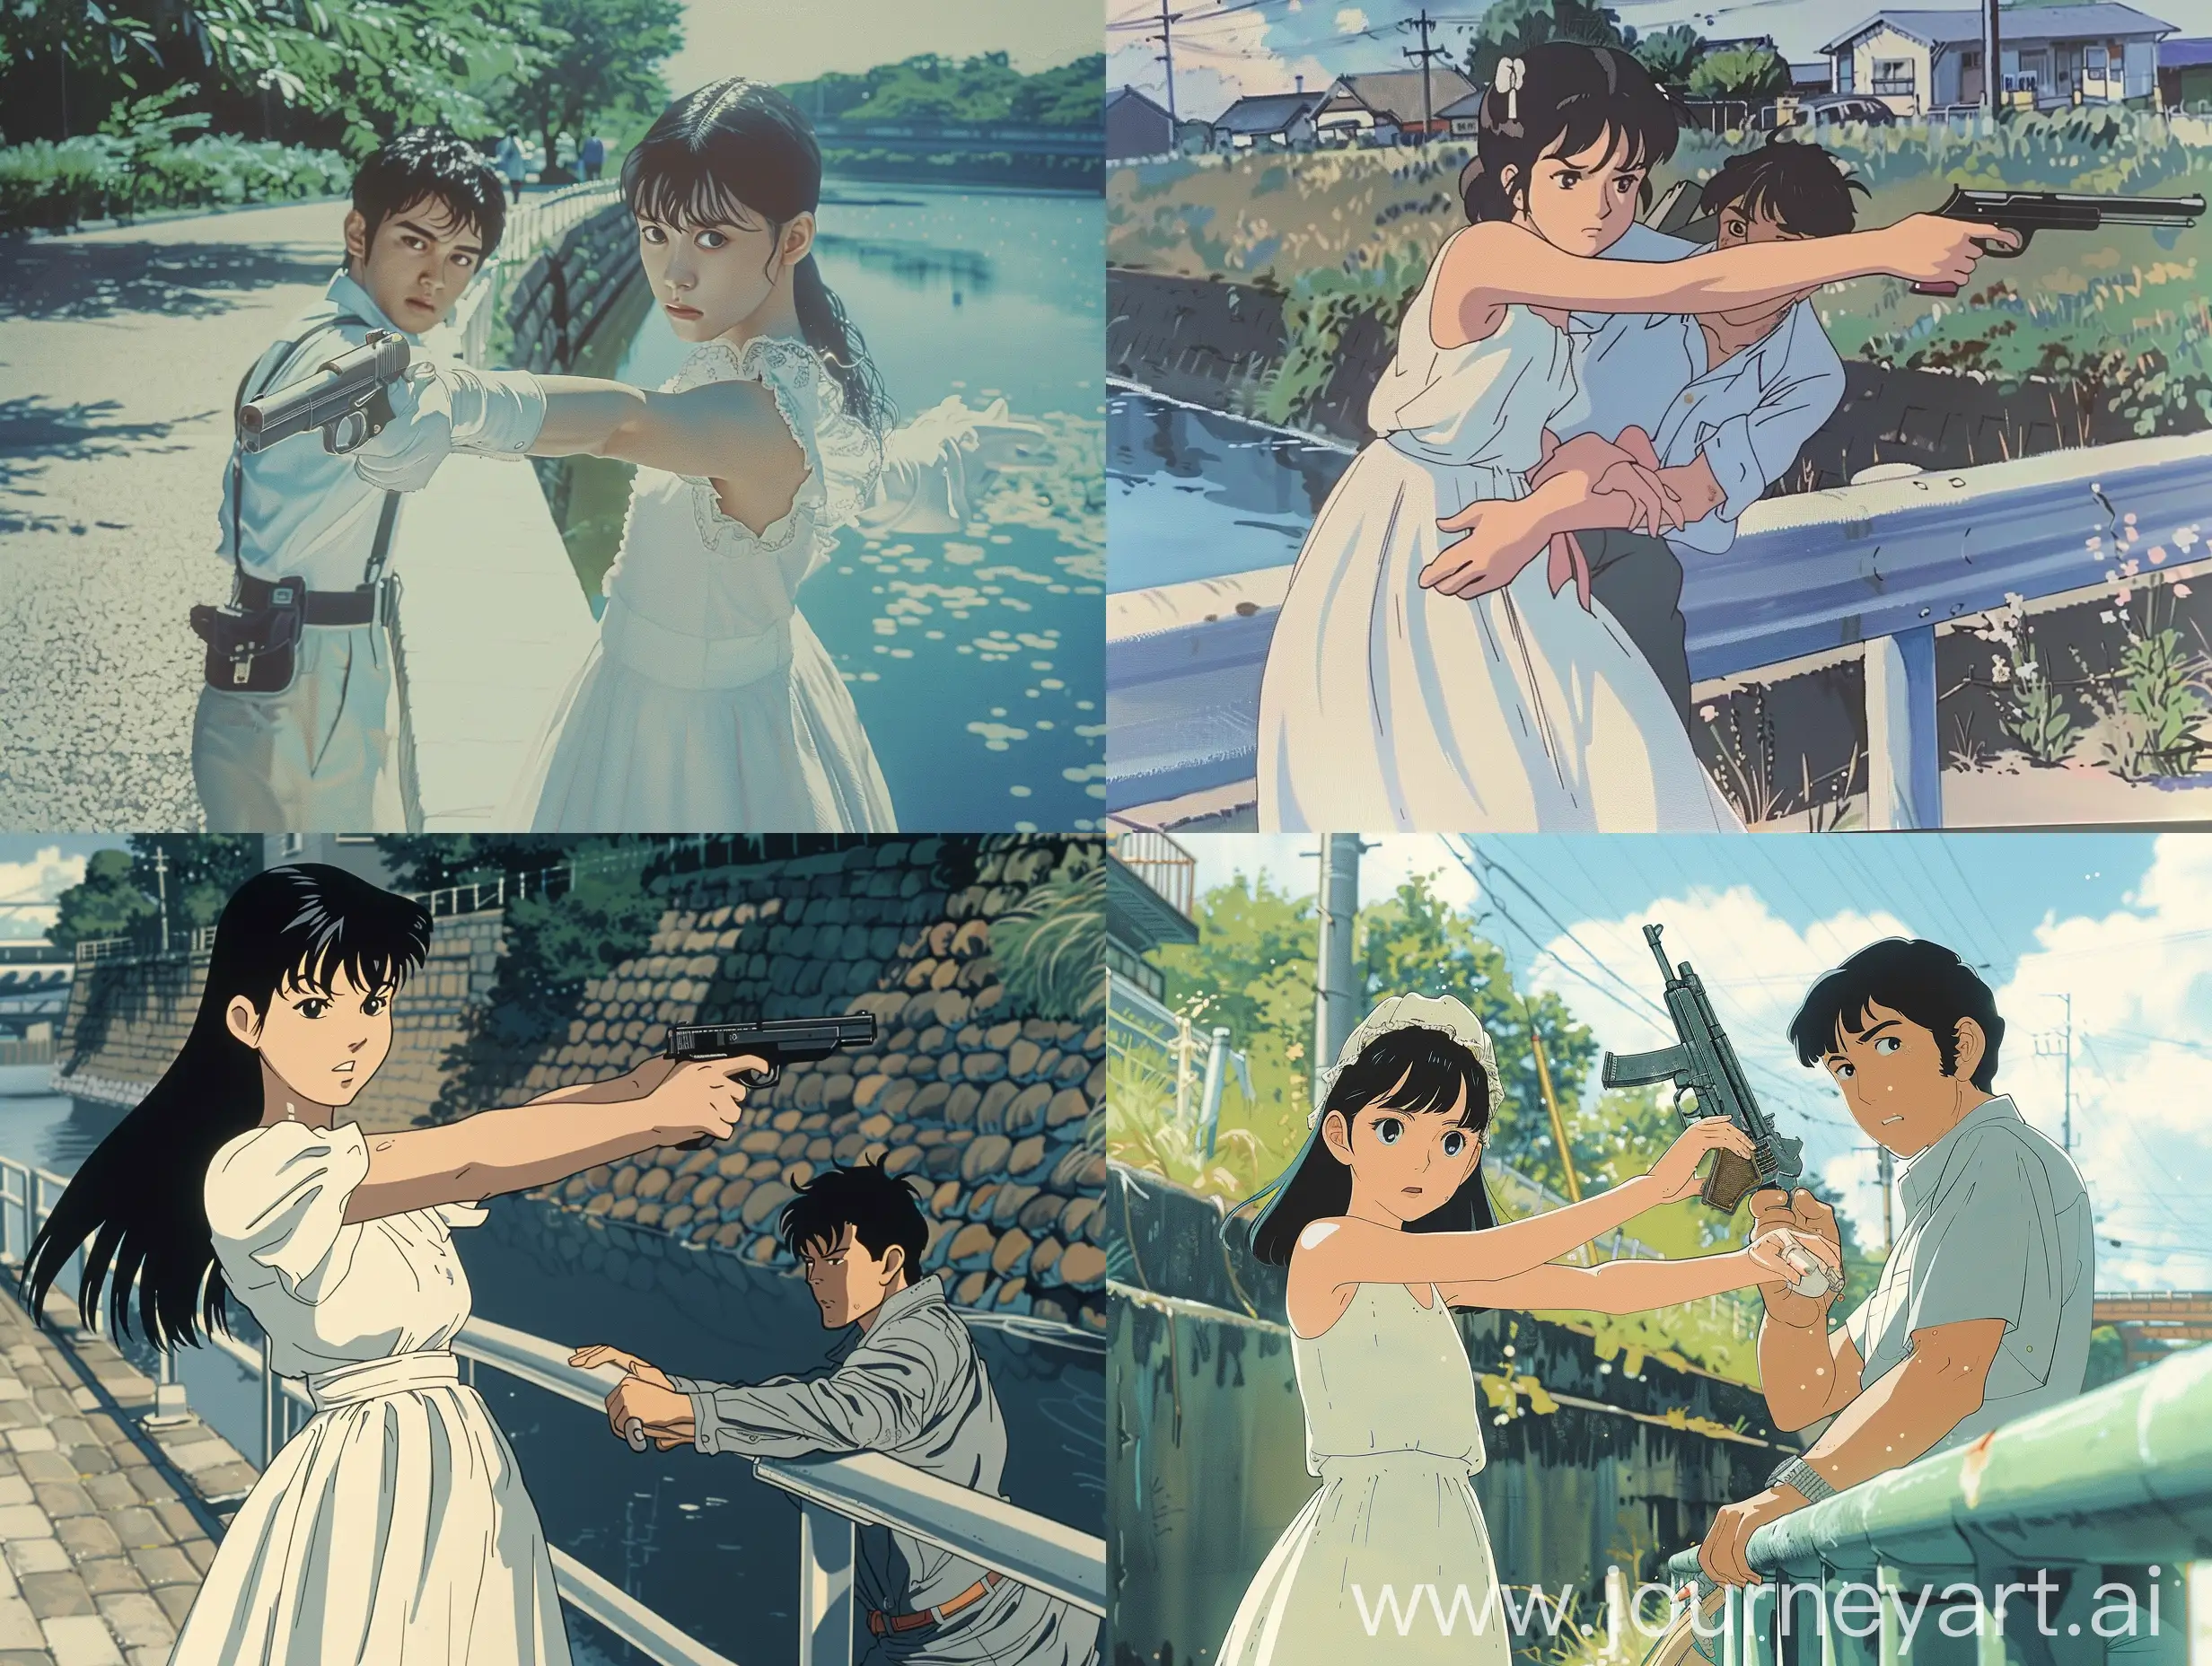 a female character in a 90's anime style. Makoto Shinkai style, Action movie stills, a young girl in a white dress subdues the male agent with a pistol, full body image, will leave you in awe of its intricate details and stylistic rendering, manga illustrations from the 1980s, simple style, emphasizing the romance of first love, On a Japanese embankment in the 1980s, 